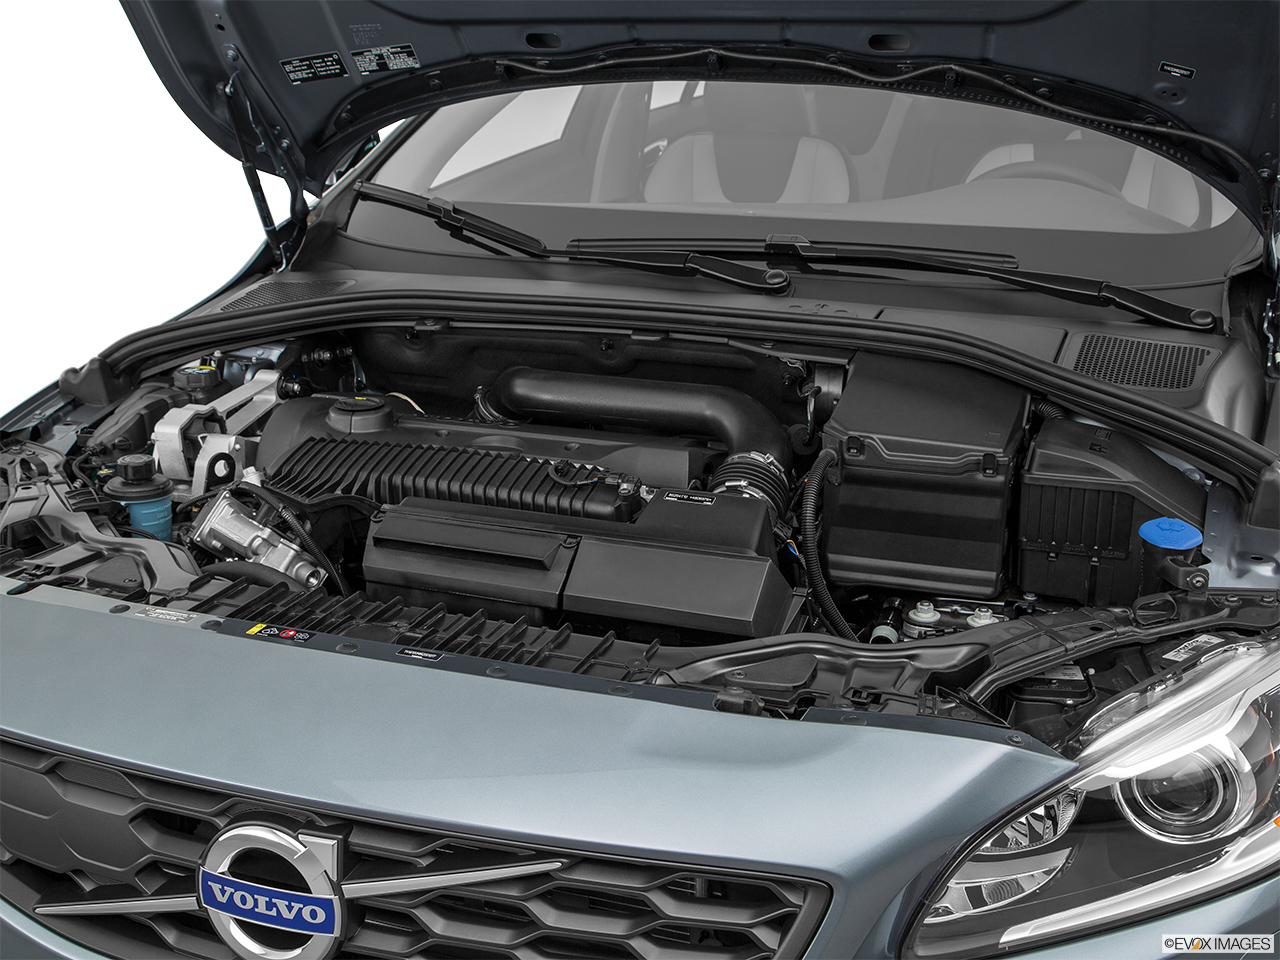 2016 Volvo S60 Cross Country T5 AWD Engine. 